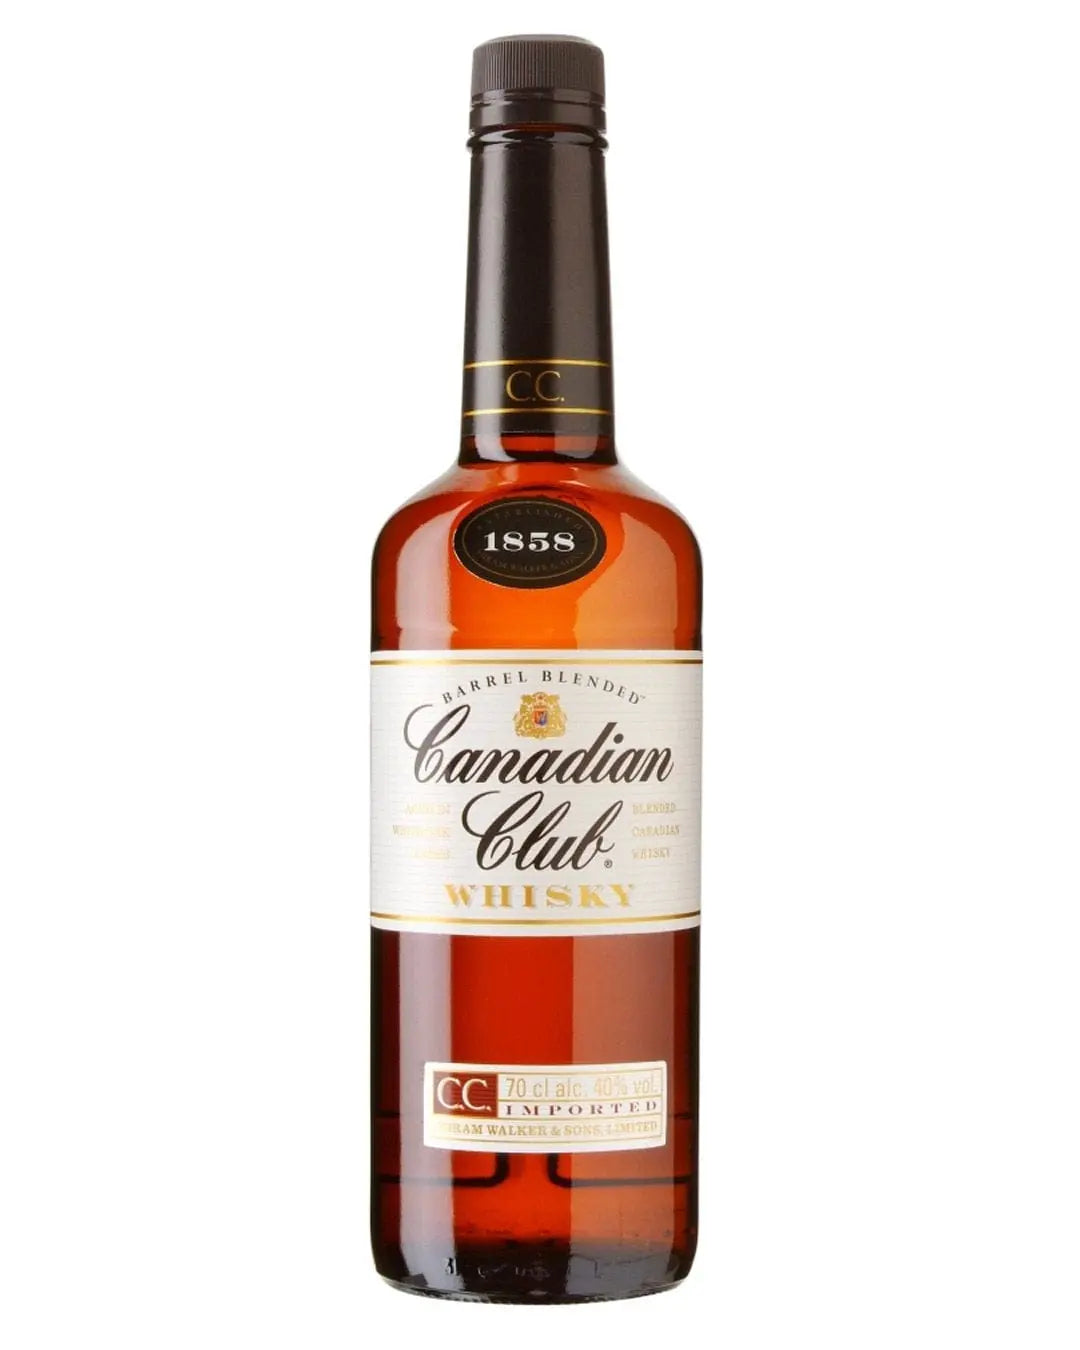 Canadian Club 1858 Original Whiskey, 70 cl Whisky 80686816072